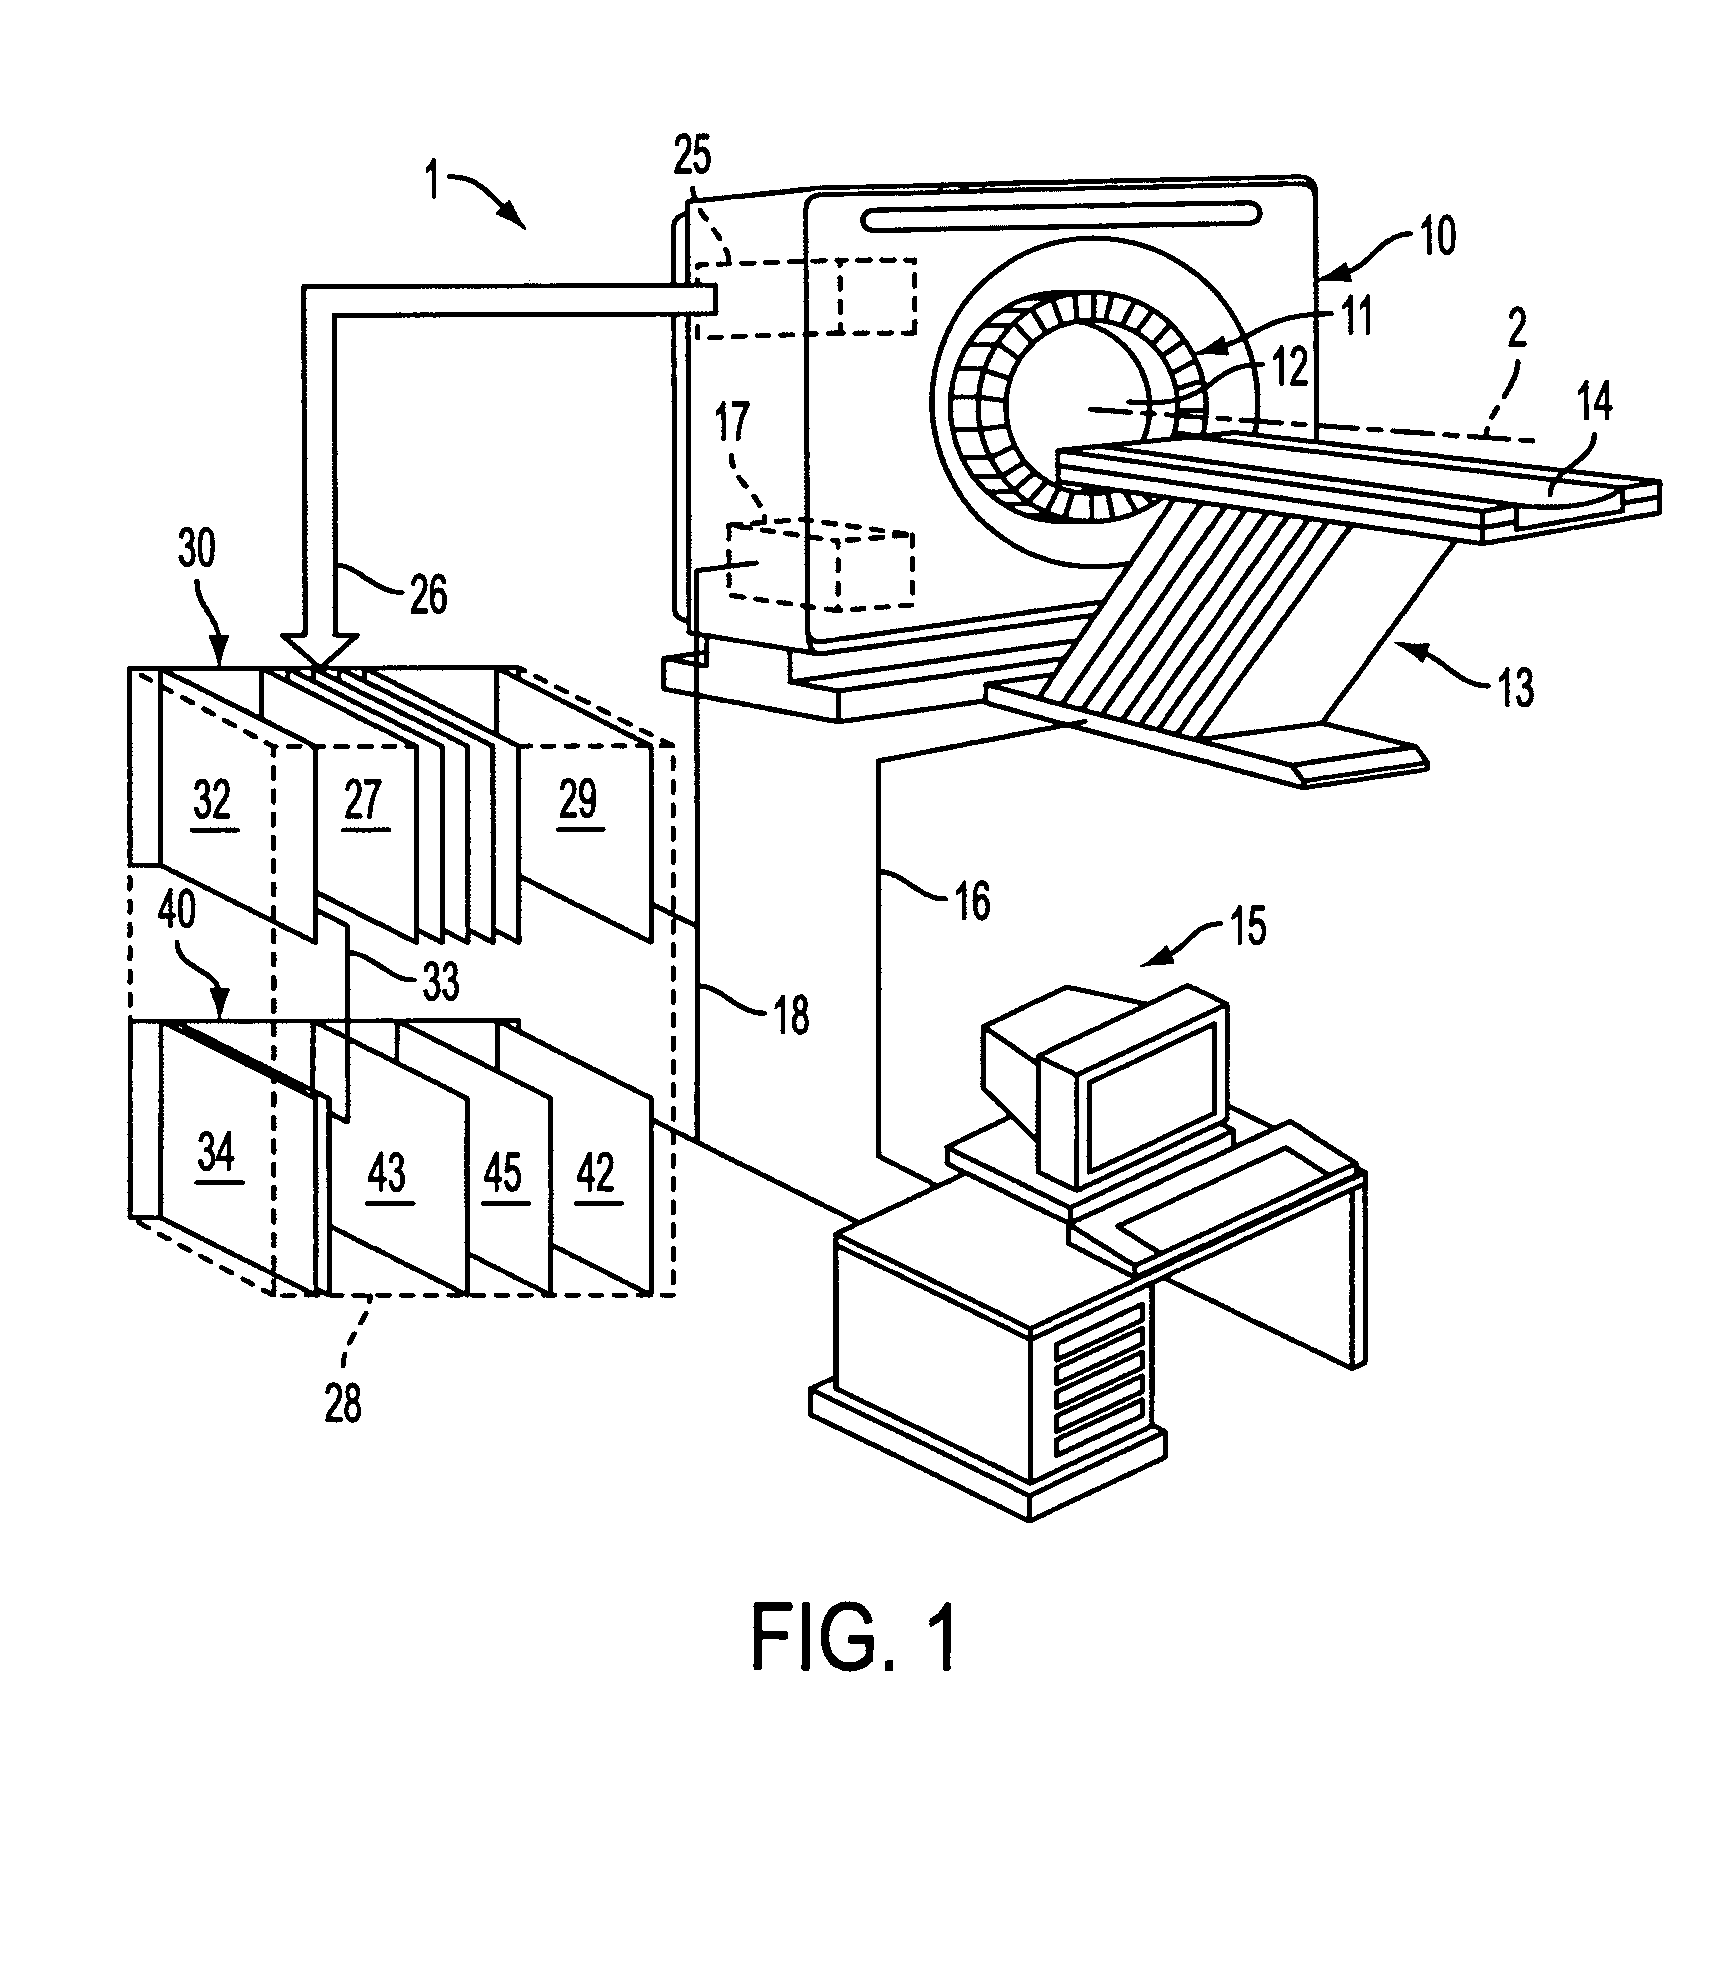 System and method for producing a detector position map